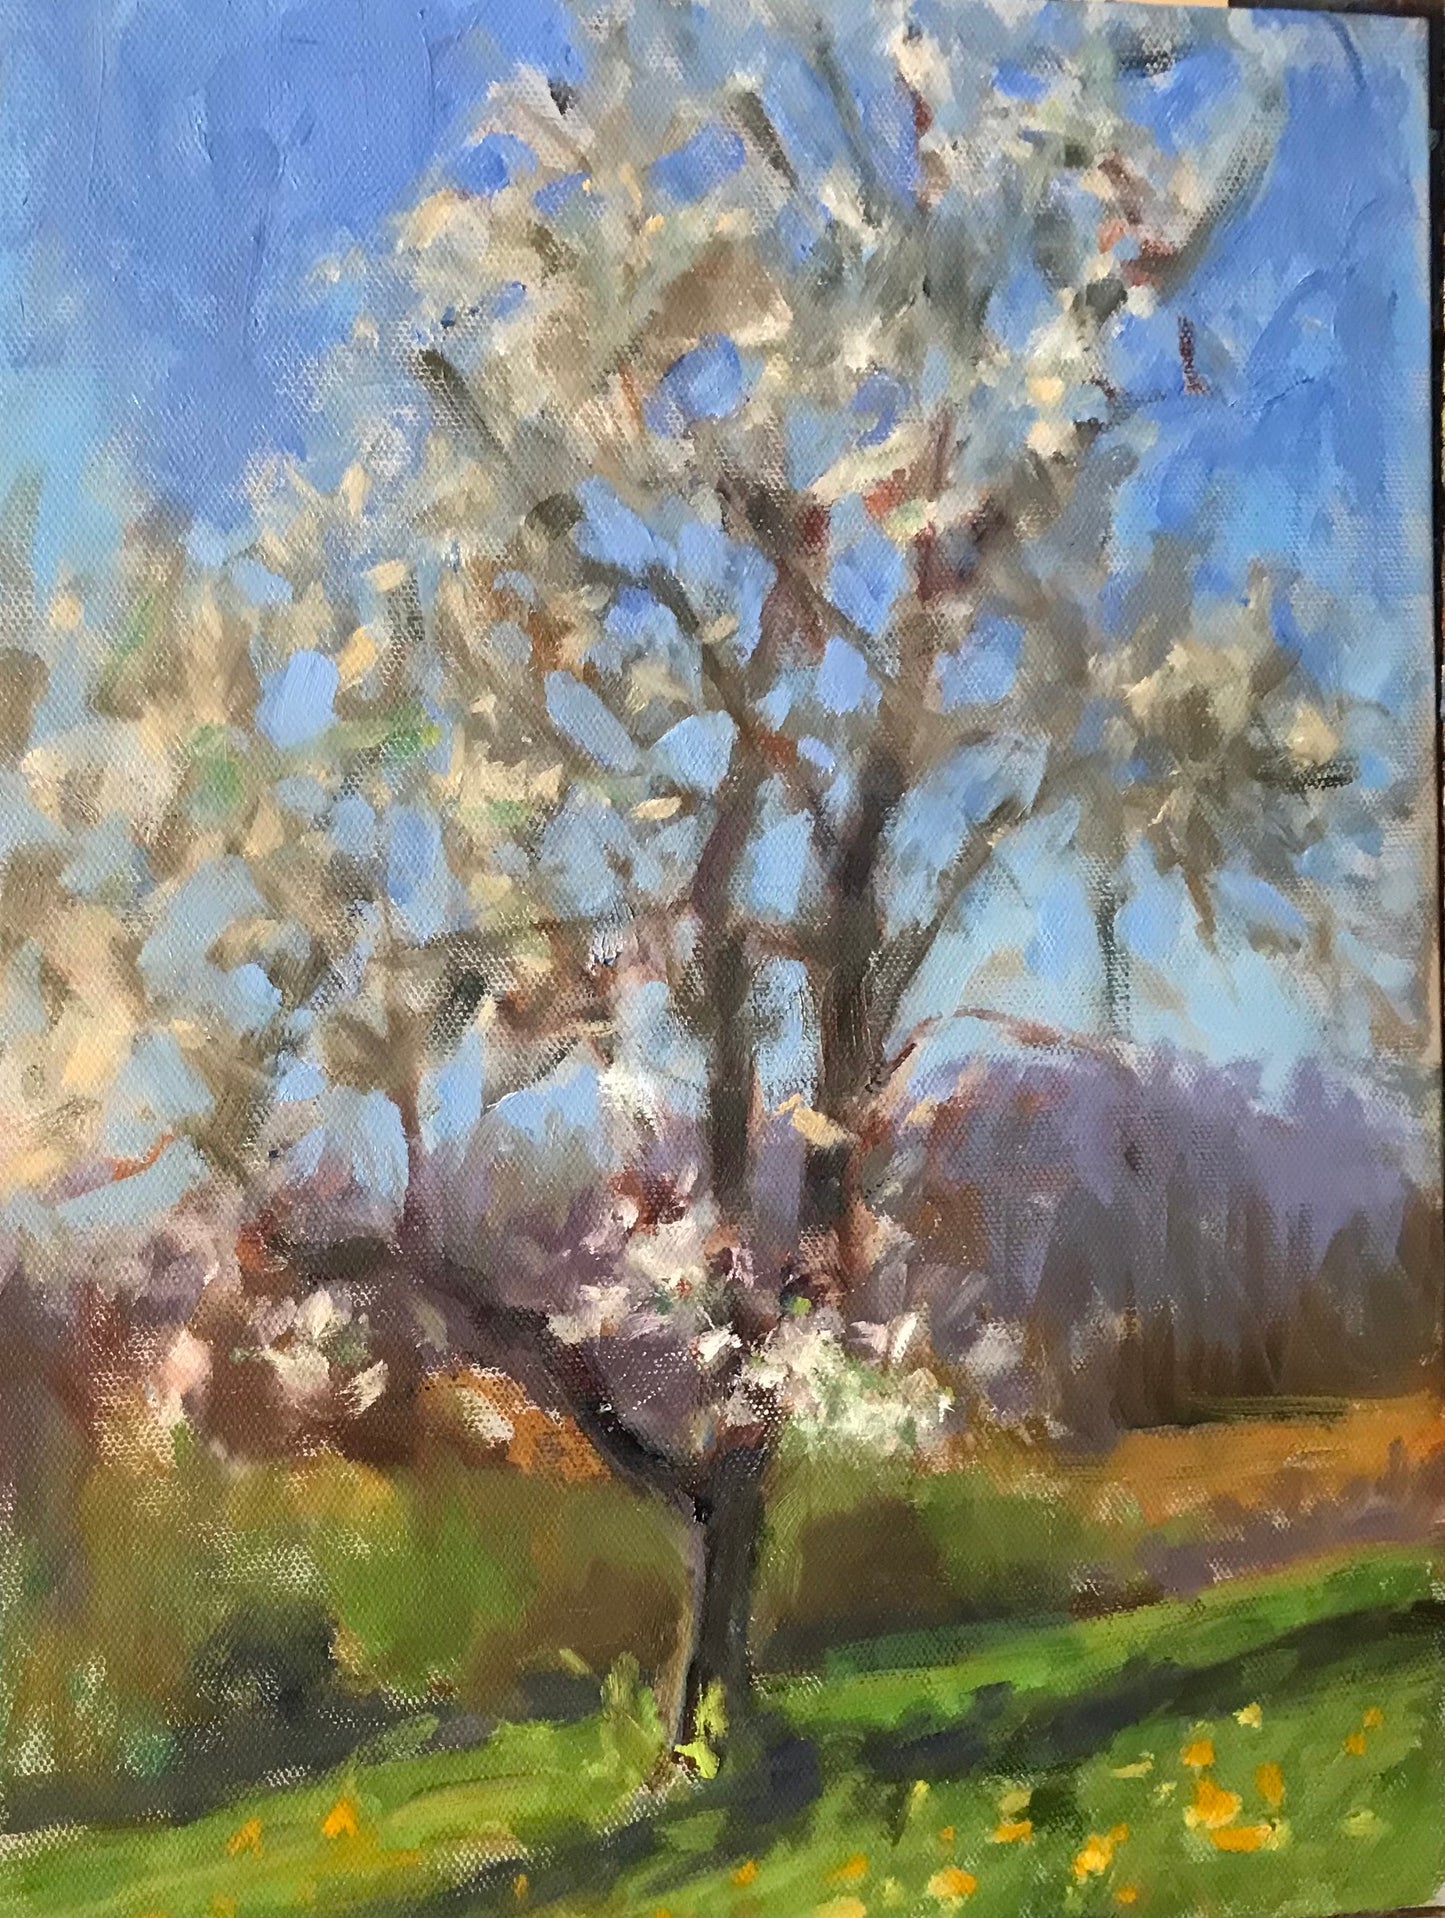 Pear Tree in April (11 x 14 Inches)